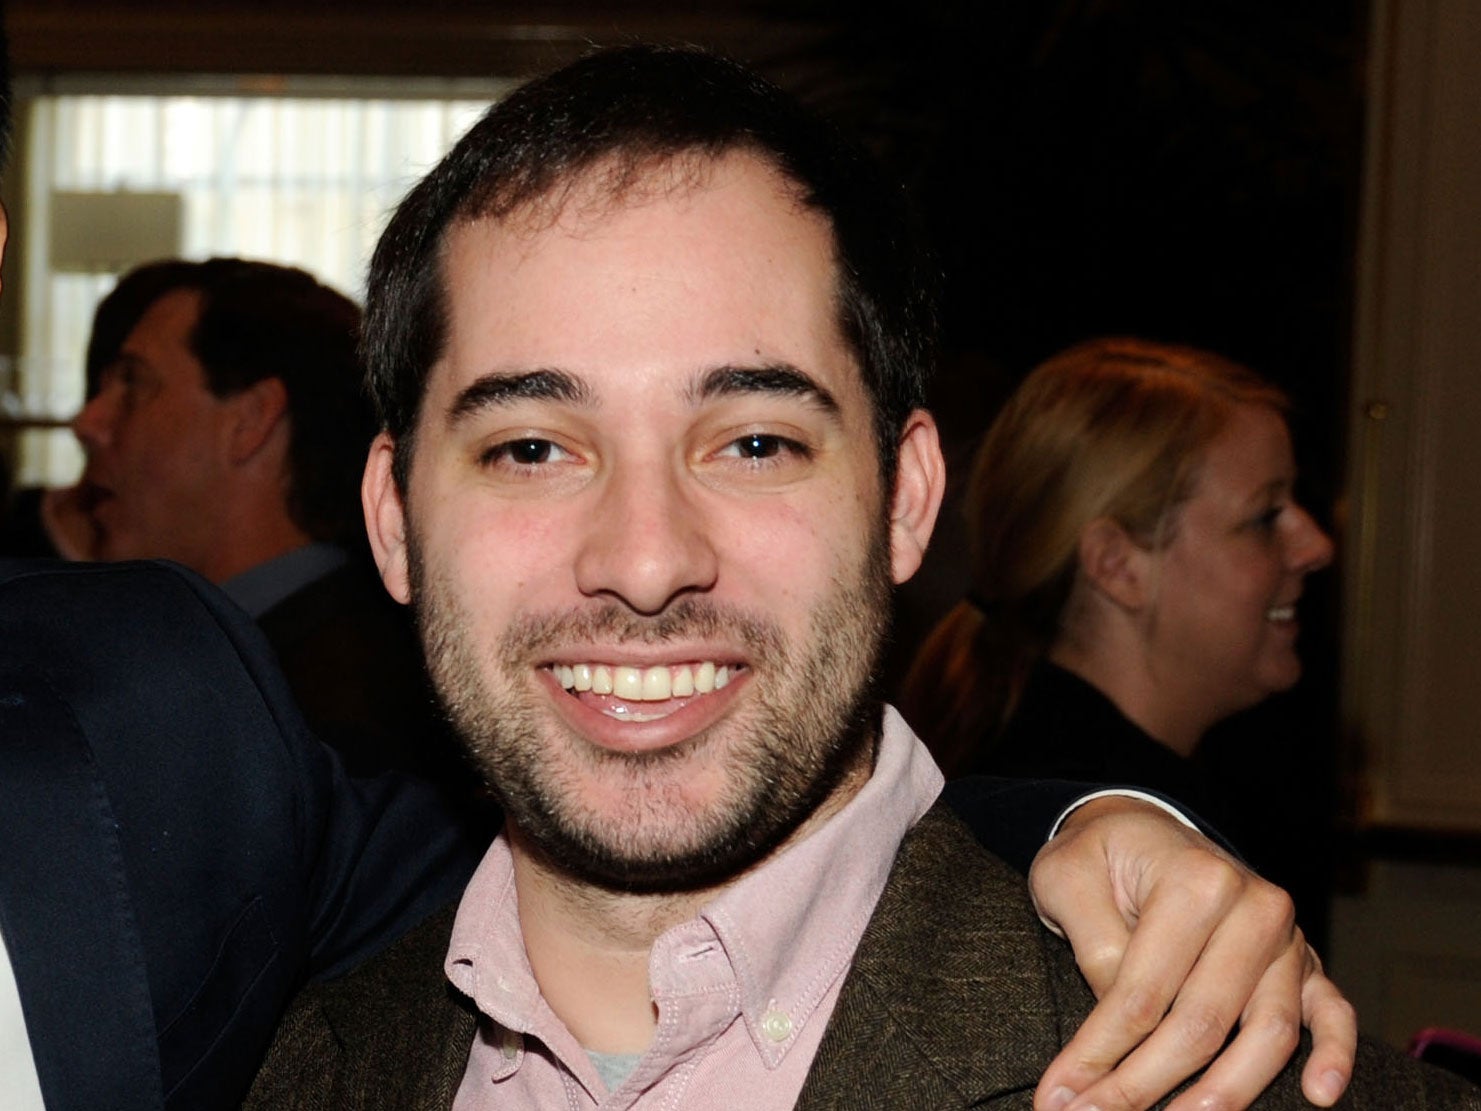 Harris Wittels at the 12th Annual AFI Awards held at the Four Seasons Hotel Los Angeles at Beverly Hills on January 13, 2012